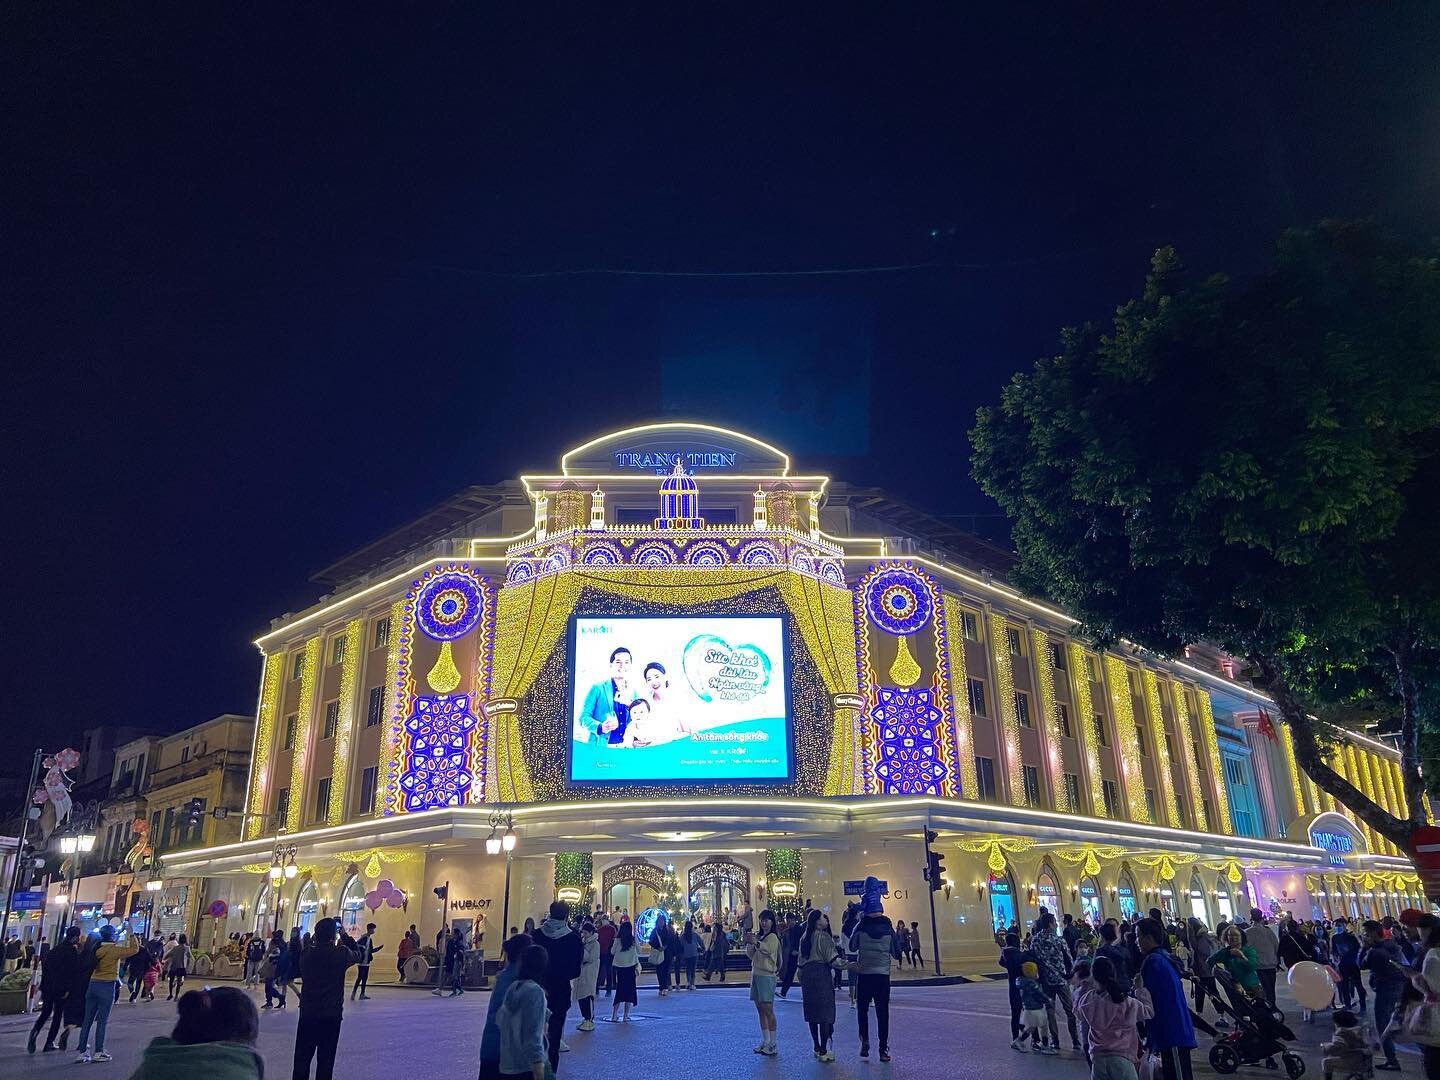 Hanoi is festive, especially at this time of year. Something I&rsquo;ve missed the last couple of years is the celebratory atmosphere around Hoan Kiem Lake in December. Street theater, food galore, mini electric cars for kids, major streets closed ar